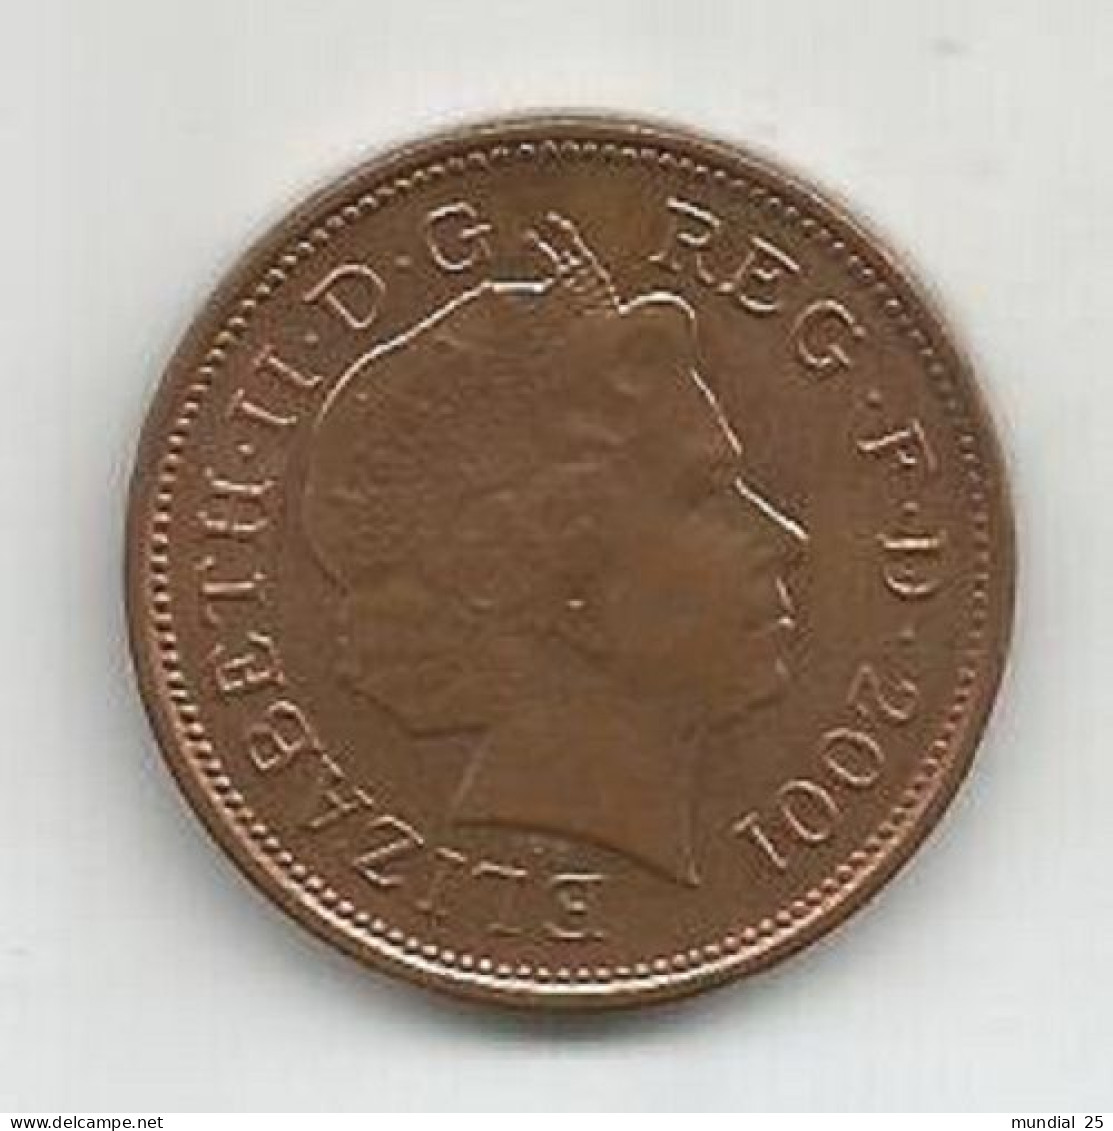 GREAT BRITAIN 2 PENCE 2001 - 2 Pence & 2 New Pence